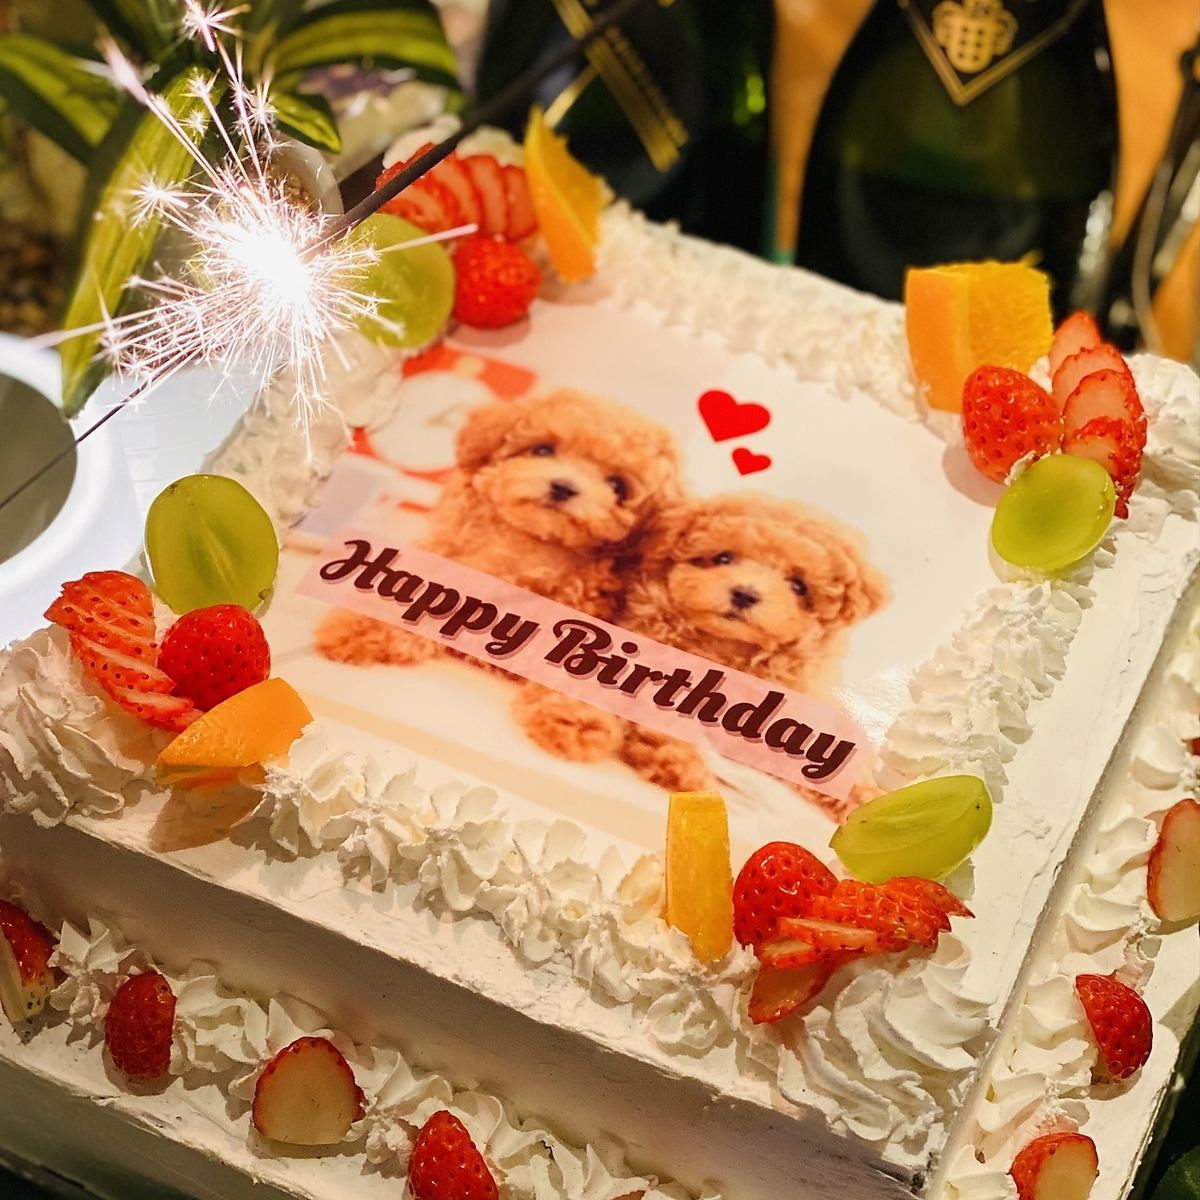 Cakes with photos, original champagne labels, and more! There are many options to liven up a surprise party in Shibuya ☆ It's sure to be an unforgettable private party (*^^*)